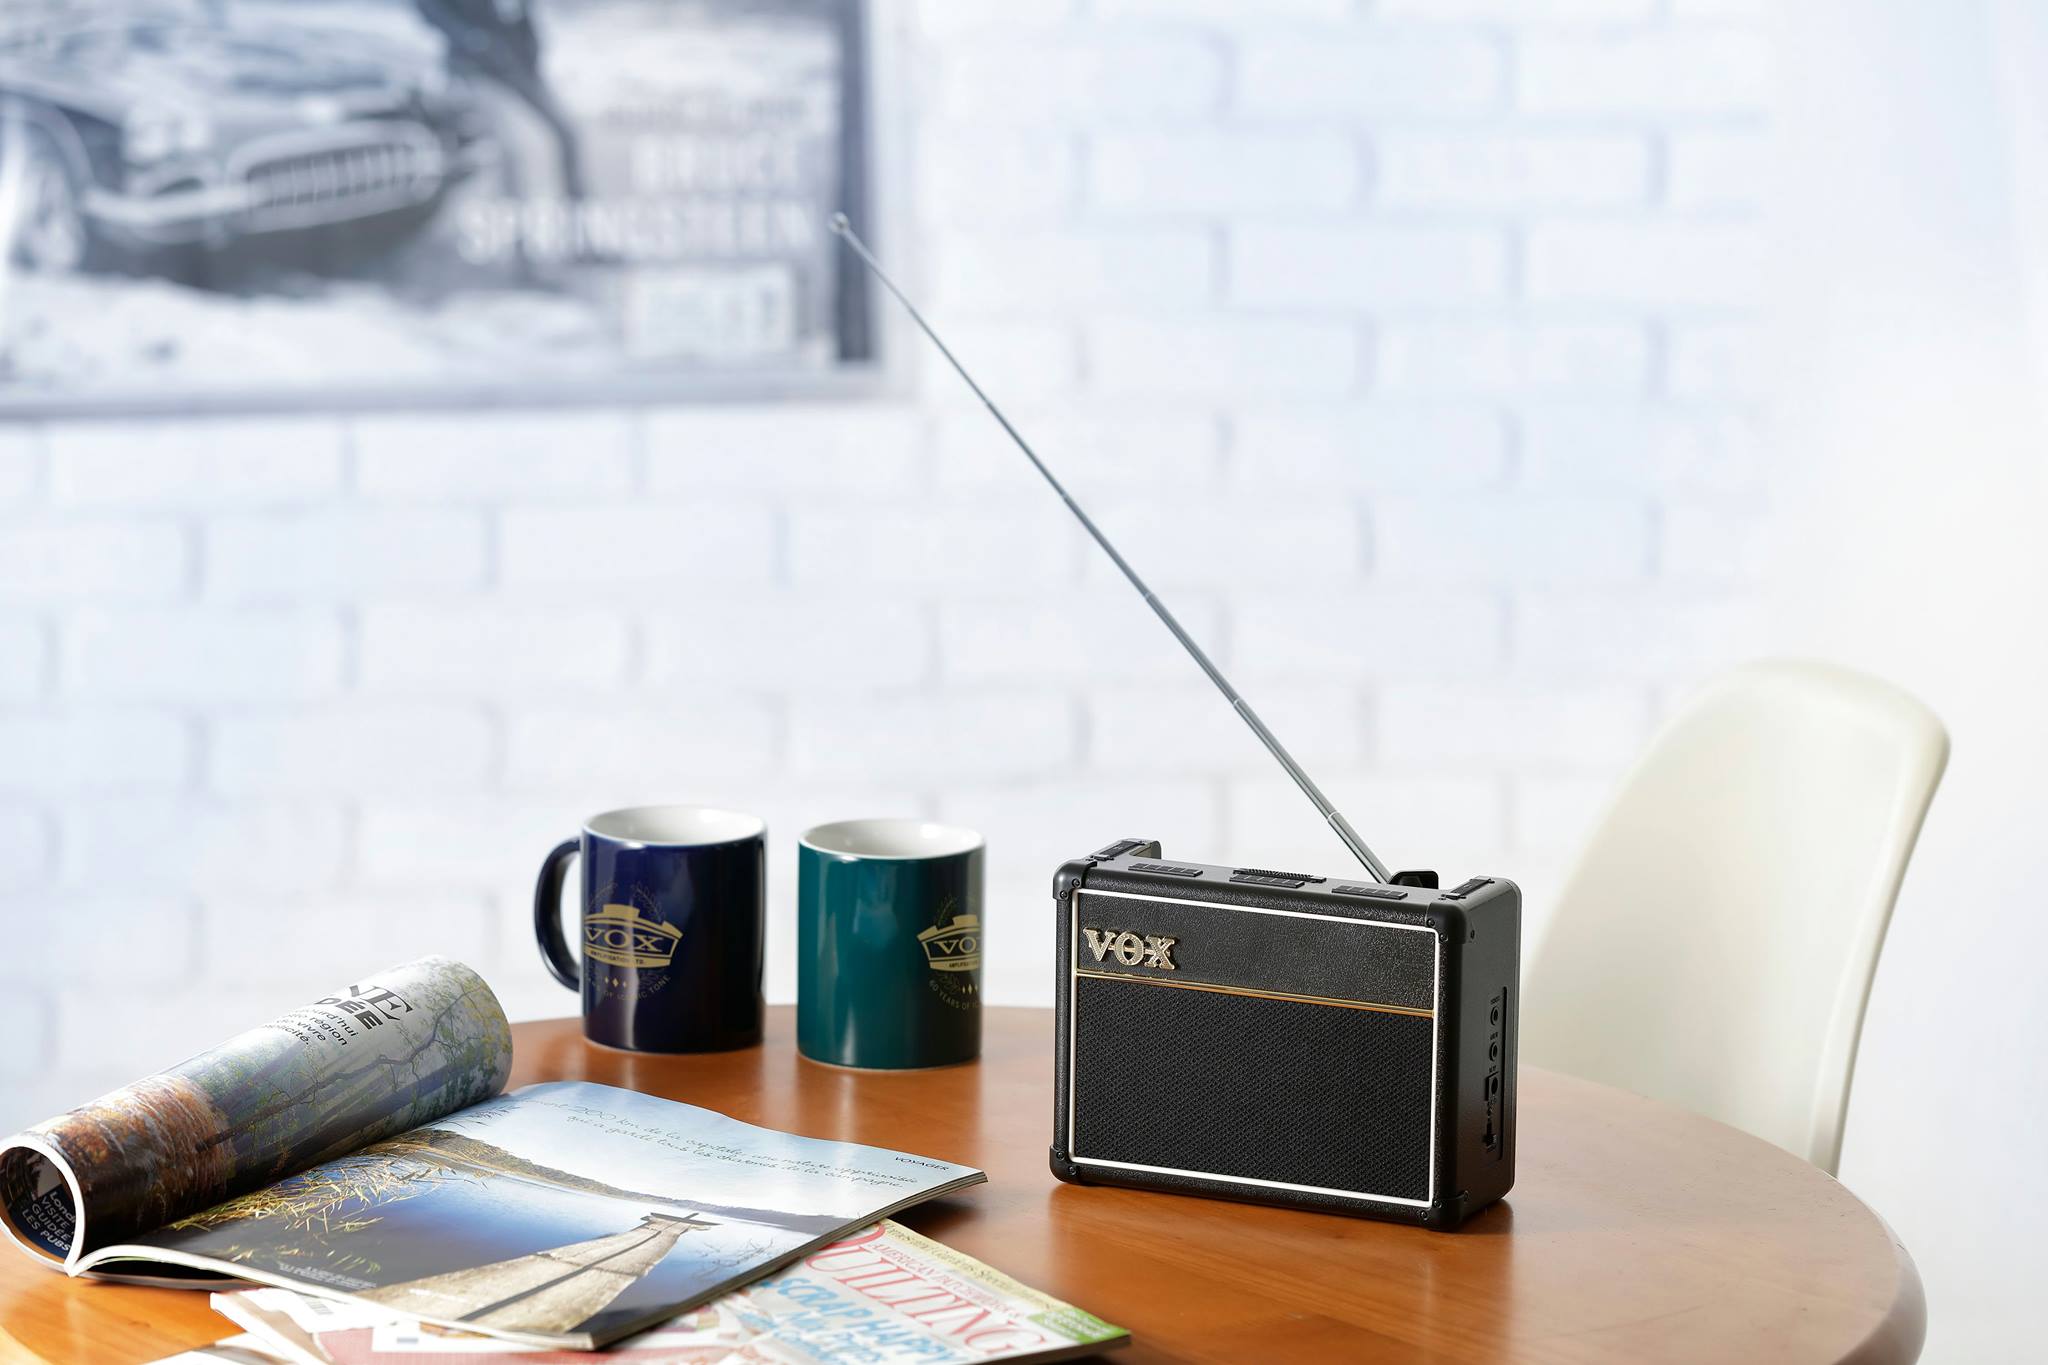 Vox are going miniature with tiny new amps and radios